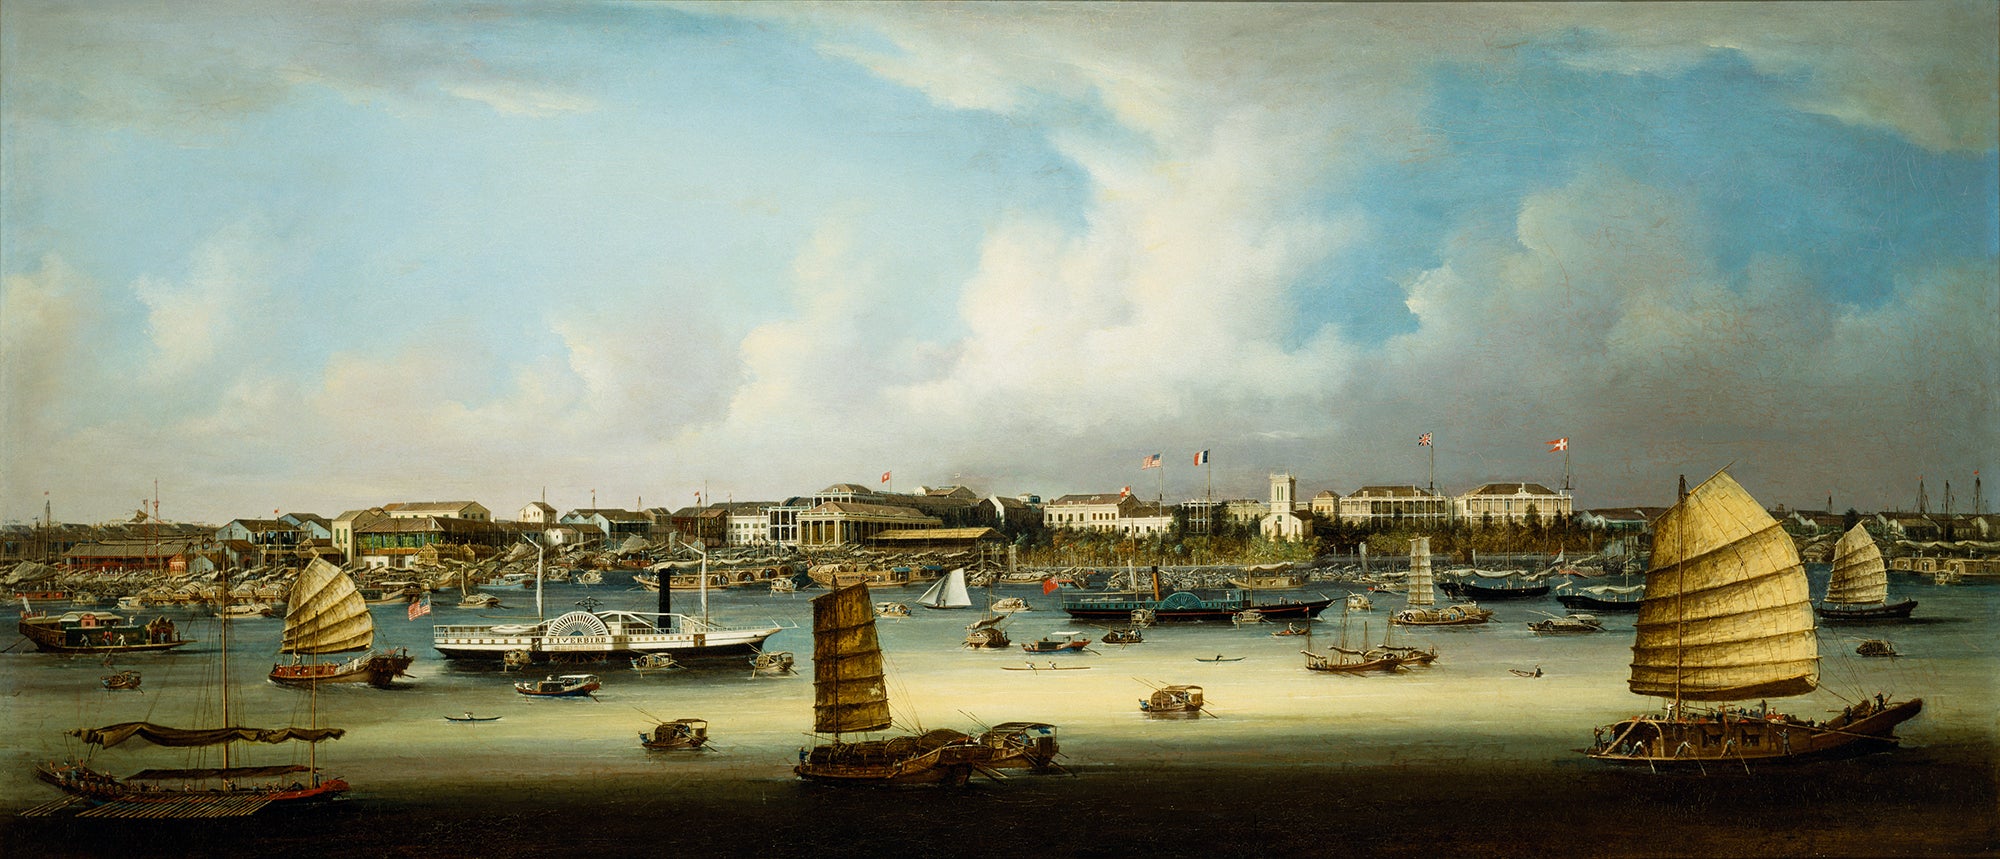 An expansive port landscape filled with different kinds of ships